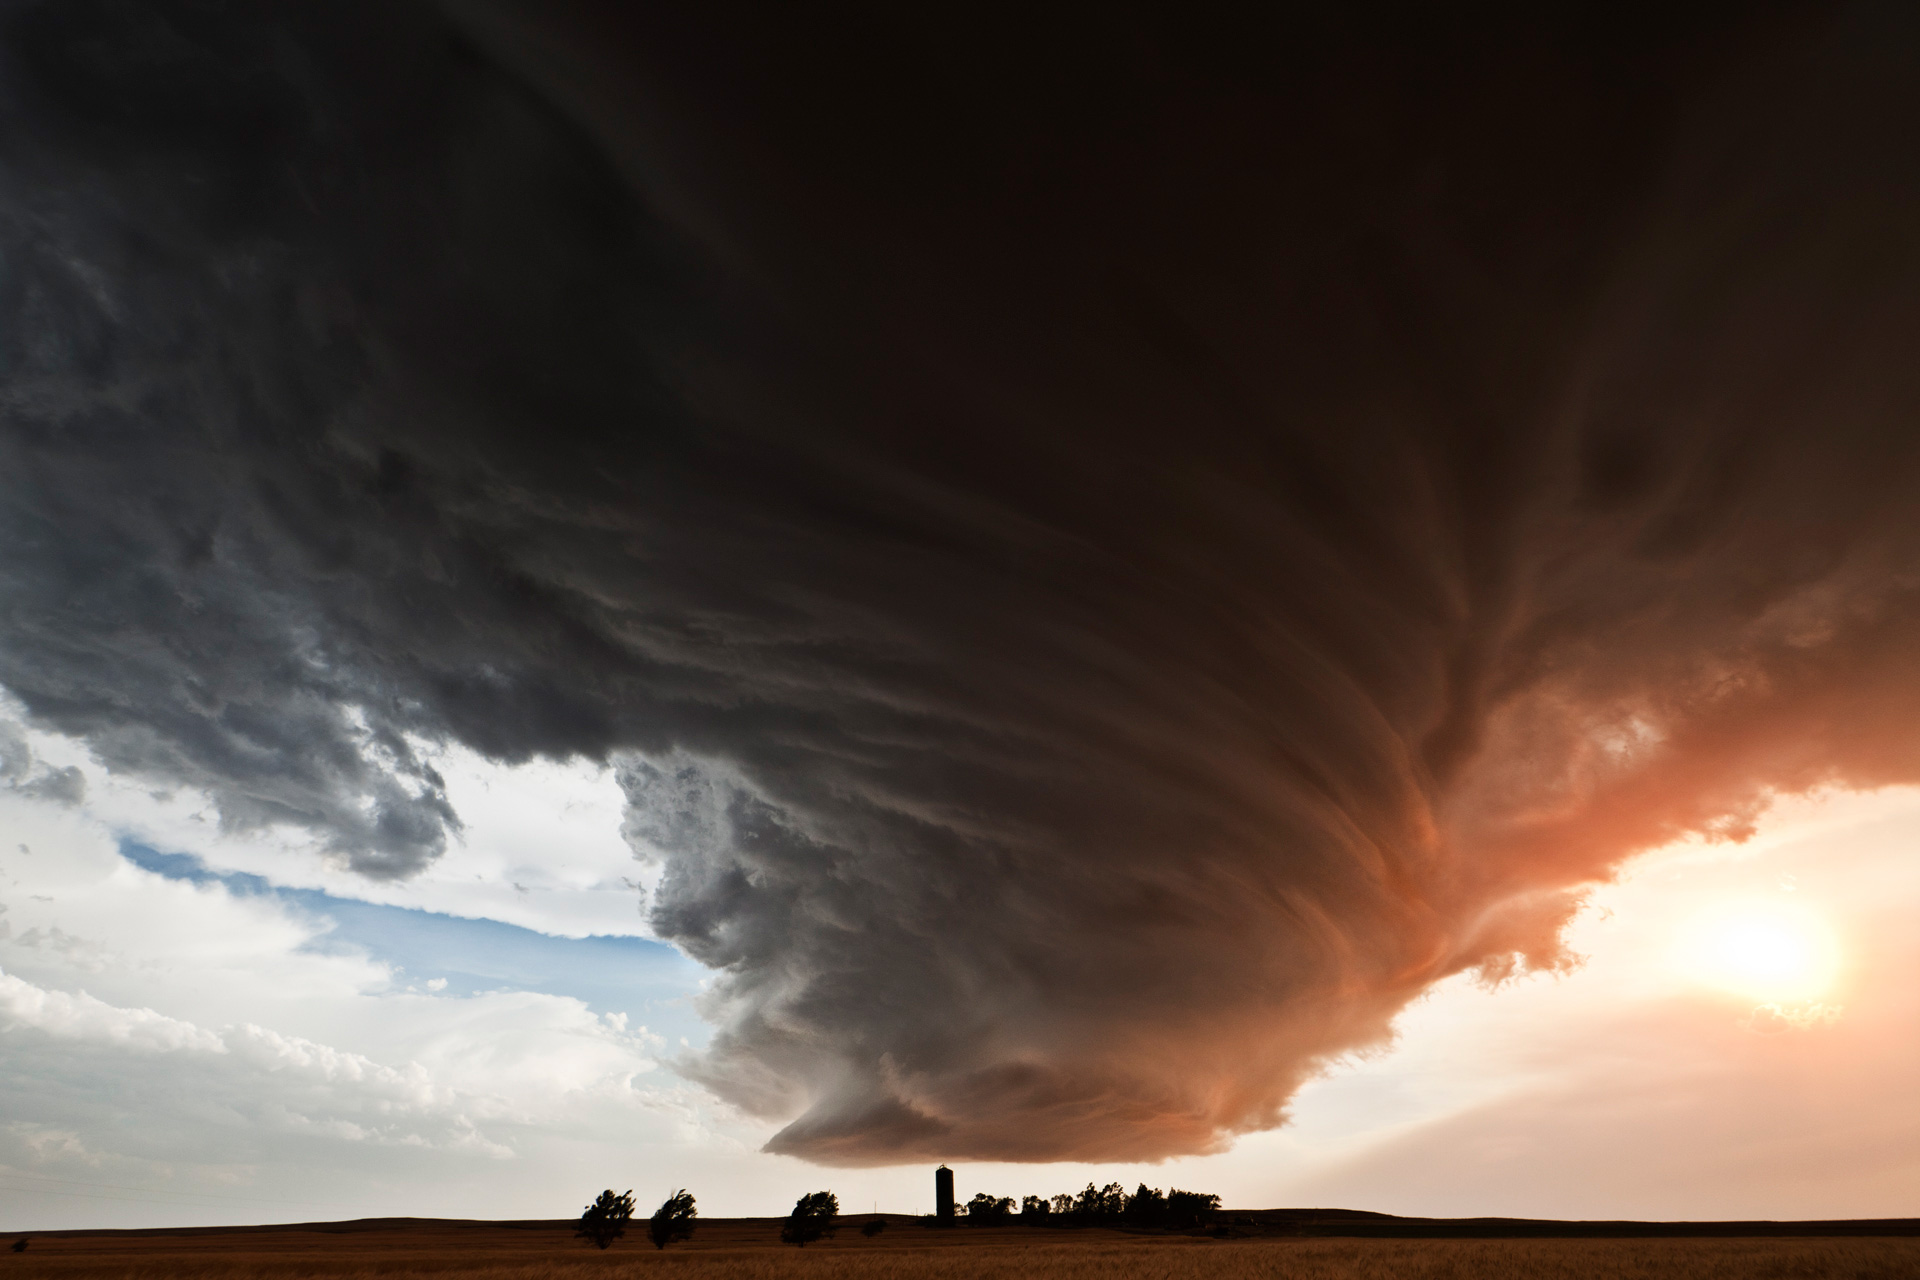 The Lovely Monster Over the Farm, Lodgepole, NE, 22 June 2012 19:15CST / Photo: Camille Seaman